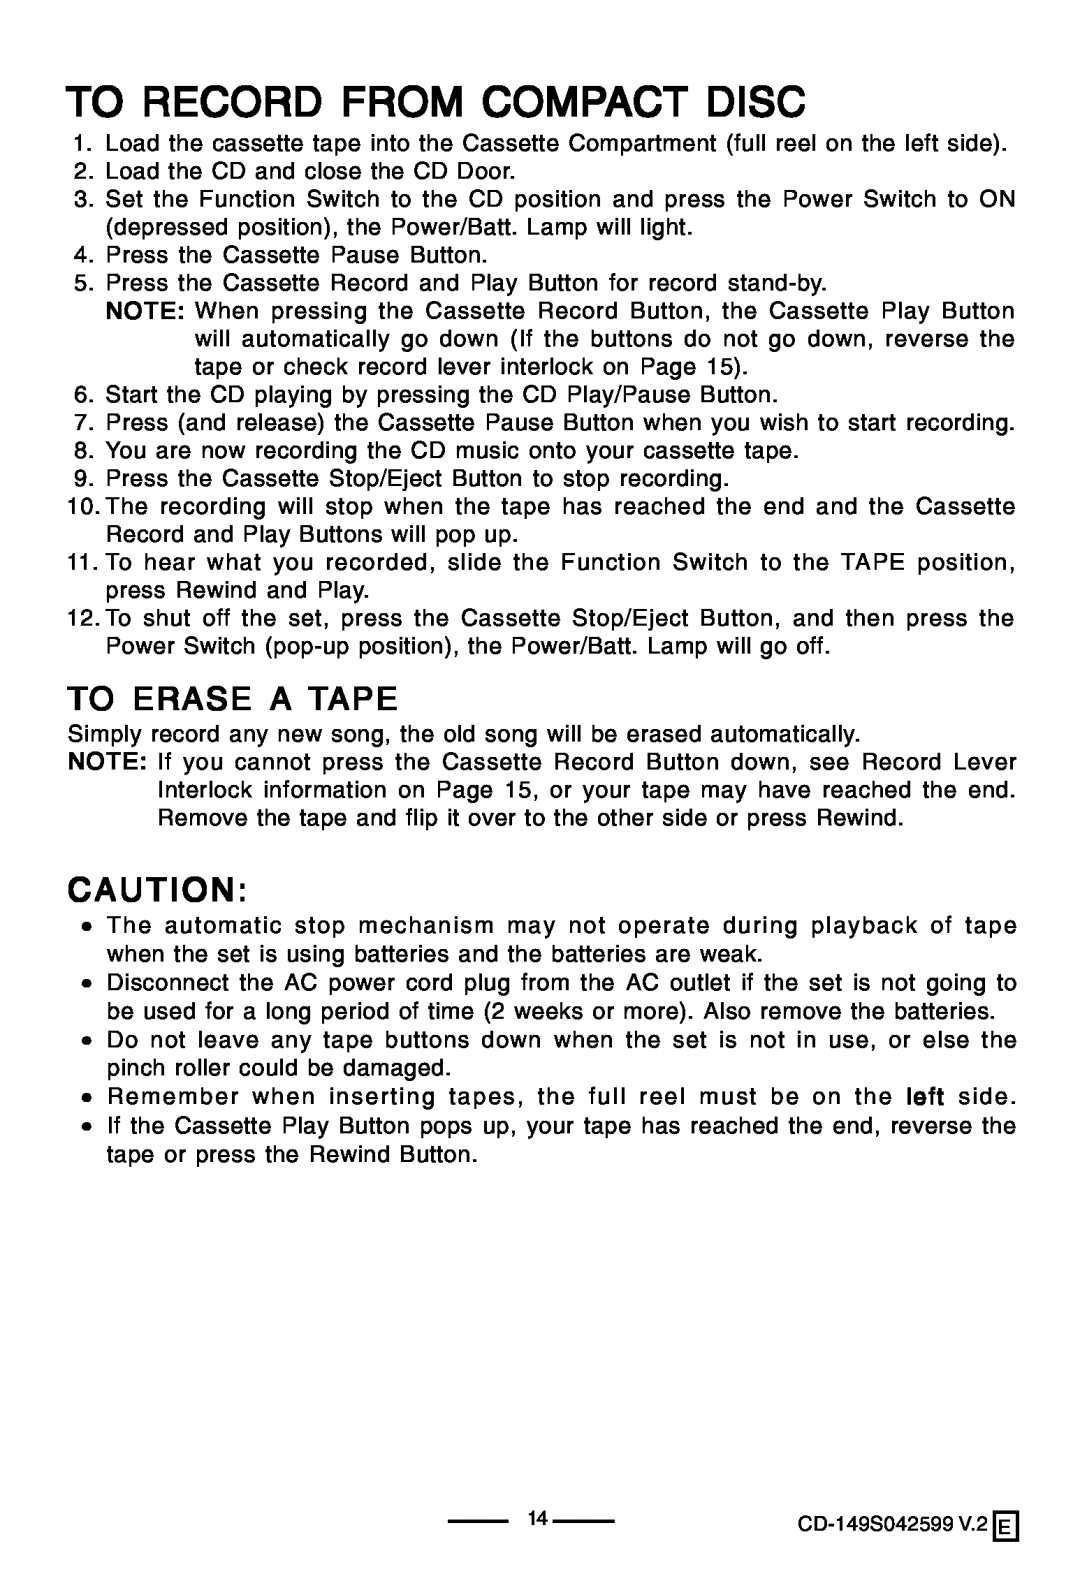 Lenoxx Electronics CD-149 operating instructions To Record From Compact Disc, To Erase A Tape 